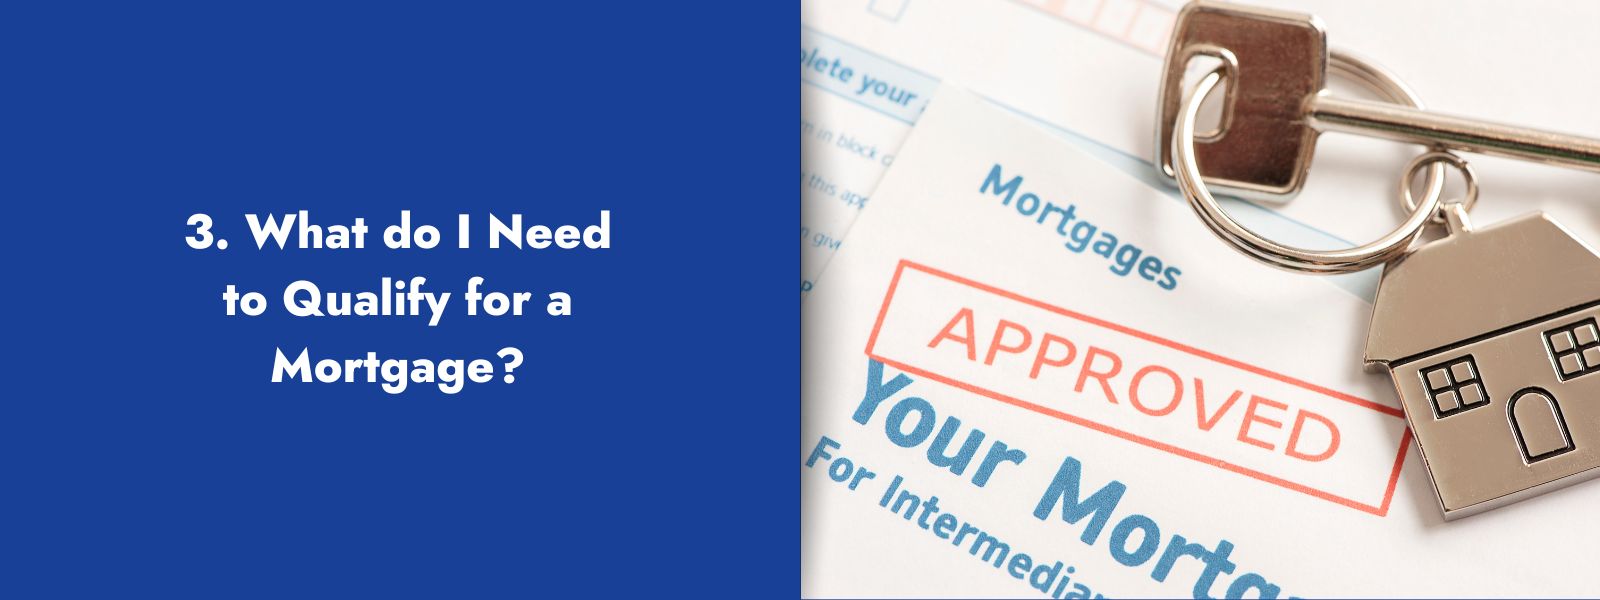 3. What do I Need to Qualify for a Mortgage